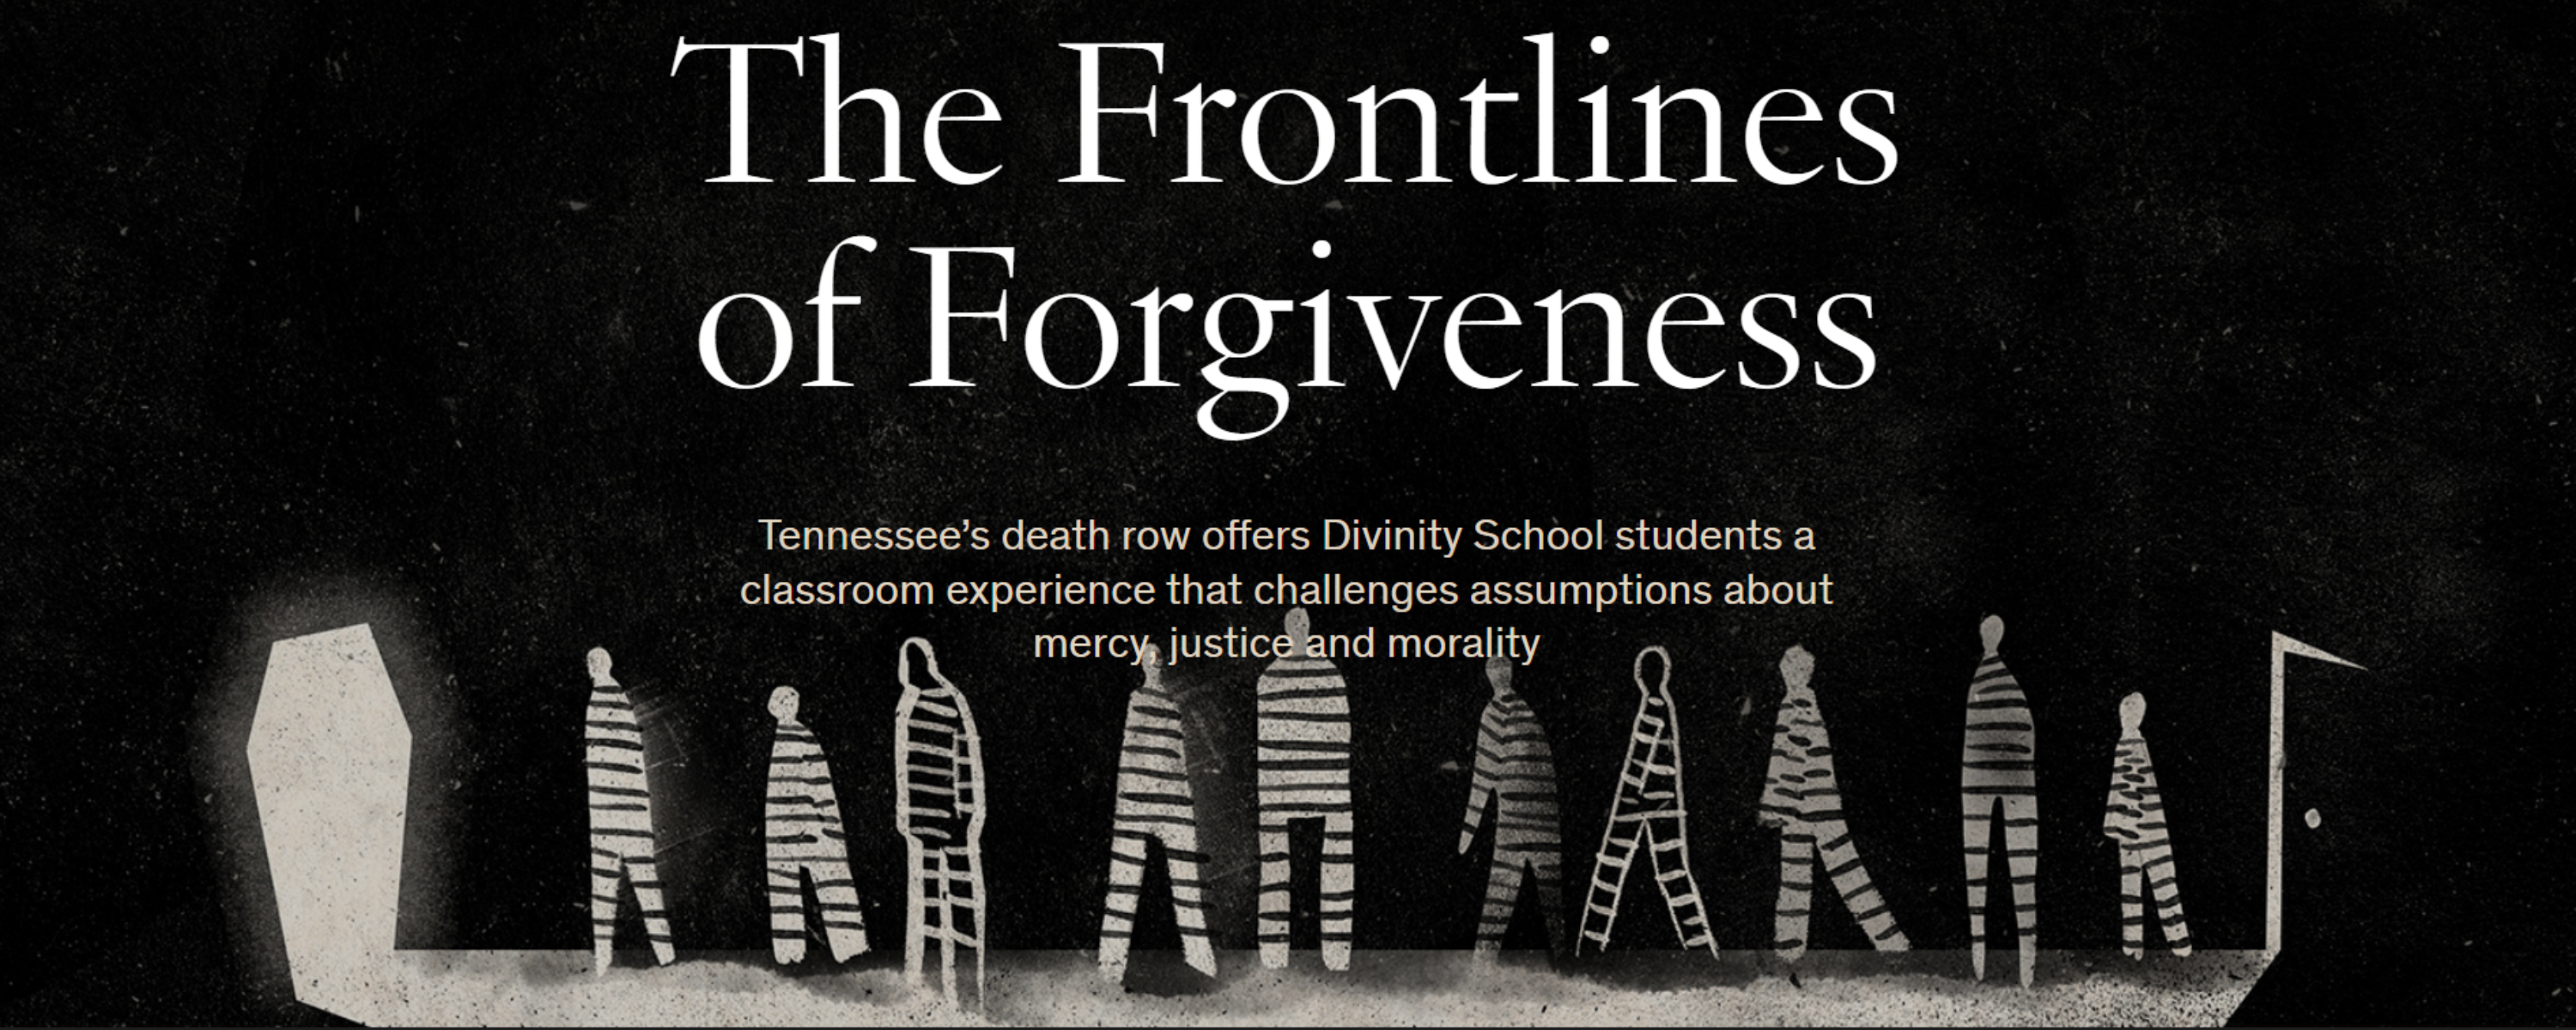 The Frontlines of Forgiveness